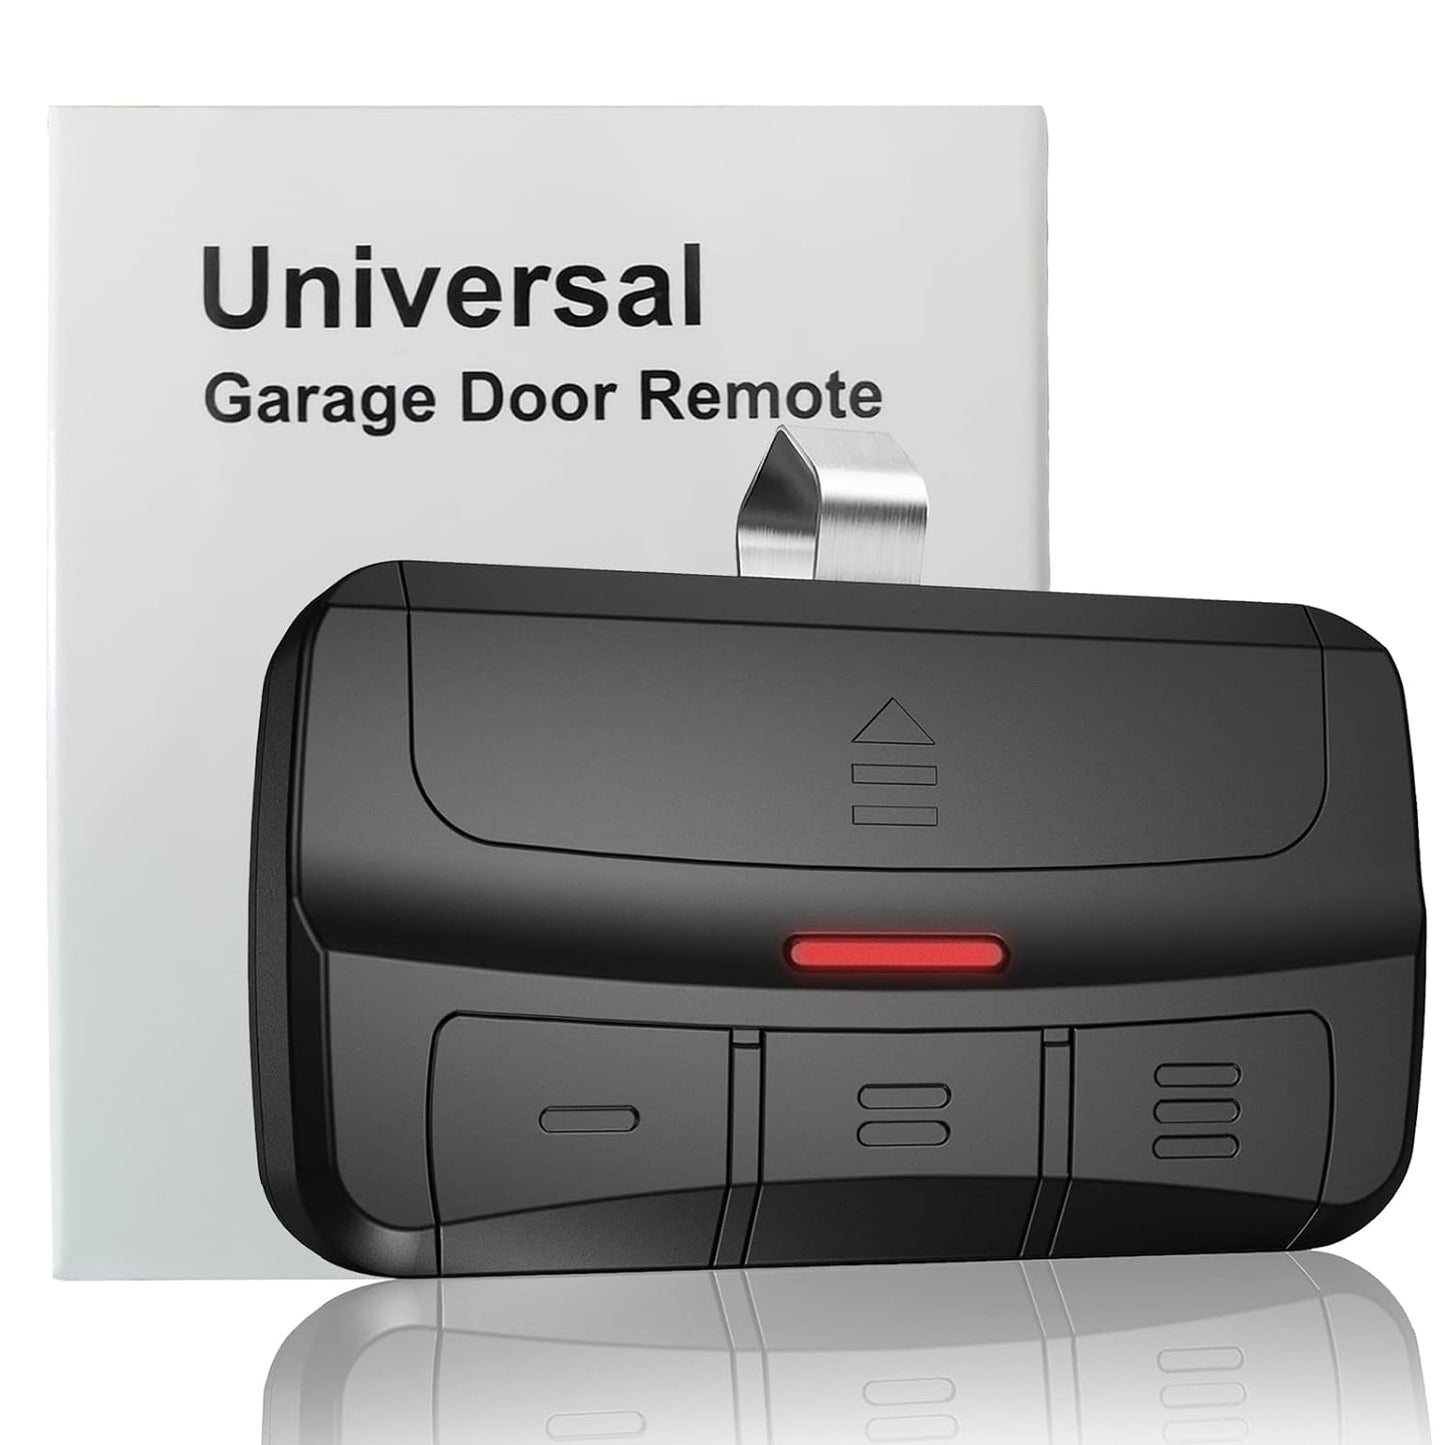 Universal Garage Door Opener Remote Compatible with LiftMaster Chamberlain Genie Craftsman Linear Wayne Dalton Overhead Garage Door Opener has Learn Button or Dip Switch Replacement for 1983-Current Brand: BeanKOneal